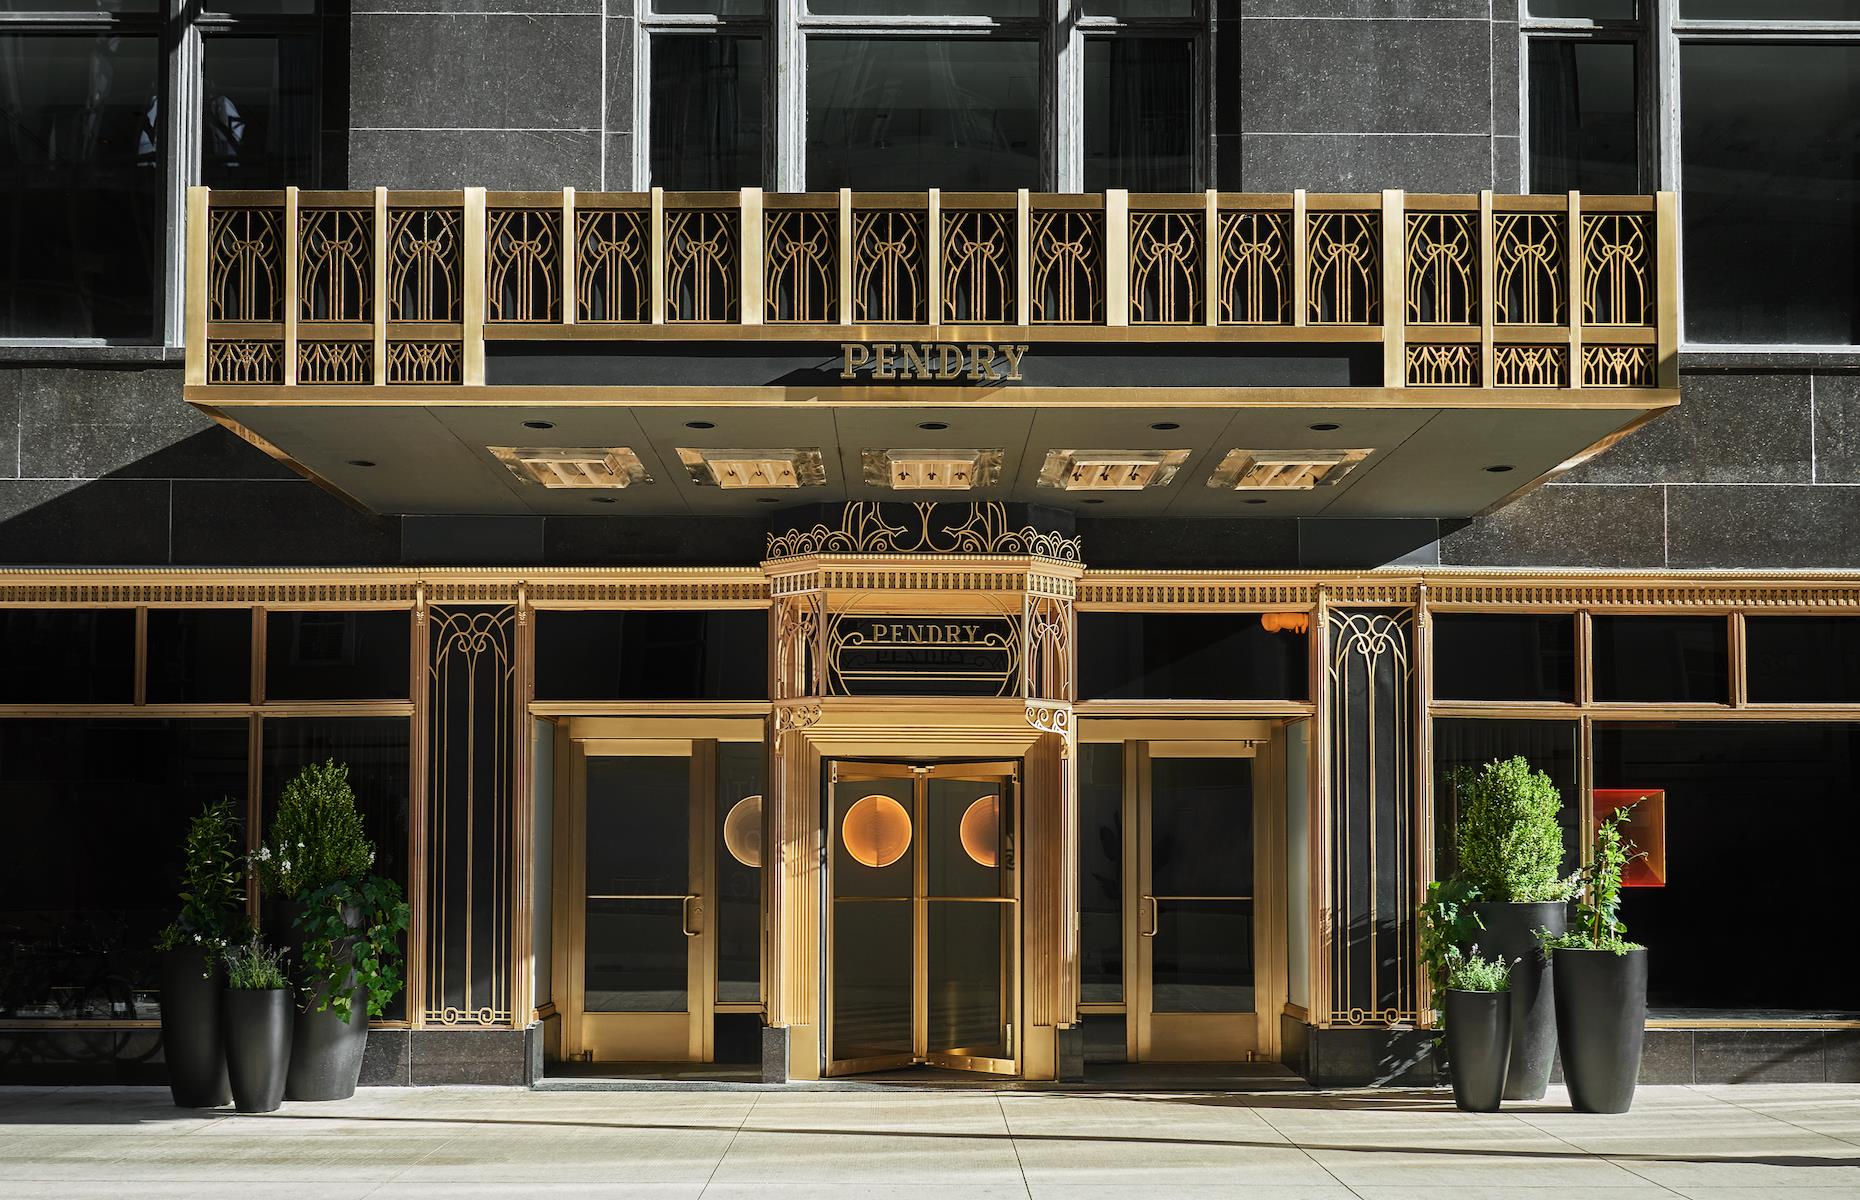 <p>Another vintage beauty in Chicago's Loop neighborhood, <a href="https://www.pendry.com">the Pendry</a> packs in the retro charm. The large and luxurious hotel opened in 2021, bringing new life to a 1929 skyscraper. The striking 37-storey structure was built as the regional HQ of the Union Carbide & Carbon company. Now a historic landmark, the tower’s facade is clad in dark green terracotta with gold leaf accents. At street level it has polished black granite and marble with an elegant bronze trim.</p>  <p><a href="https://www.loveexploring.com/galleries/72892/the-worlds-tallest-hotels-with-breathtaking-views?page=1"><strong>These are the highest hotel rooms in the world</strong></a></p>